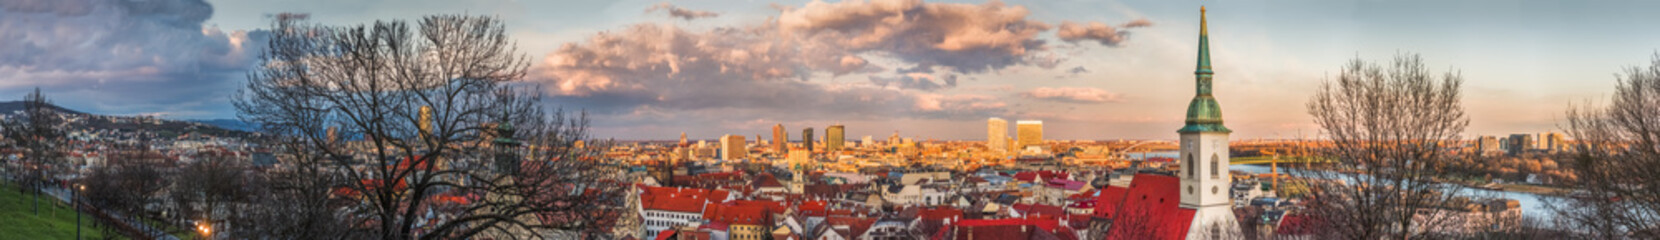 Poster - Panoramic View of Cityscape of Bratislava, Slovakia with St. Martin's Cathedral at Sunset